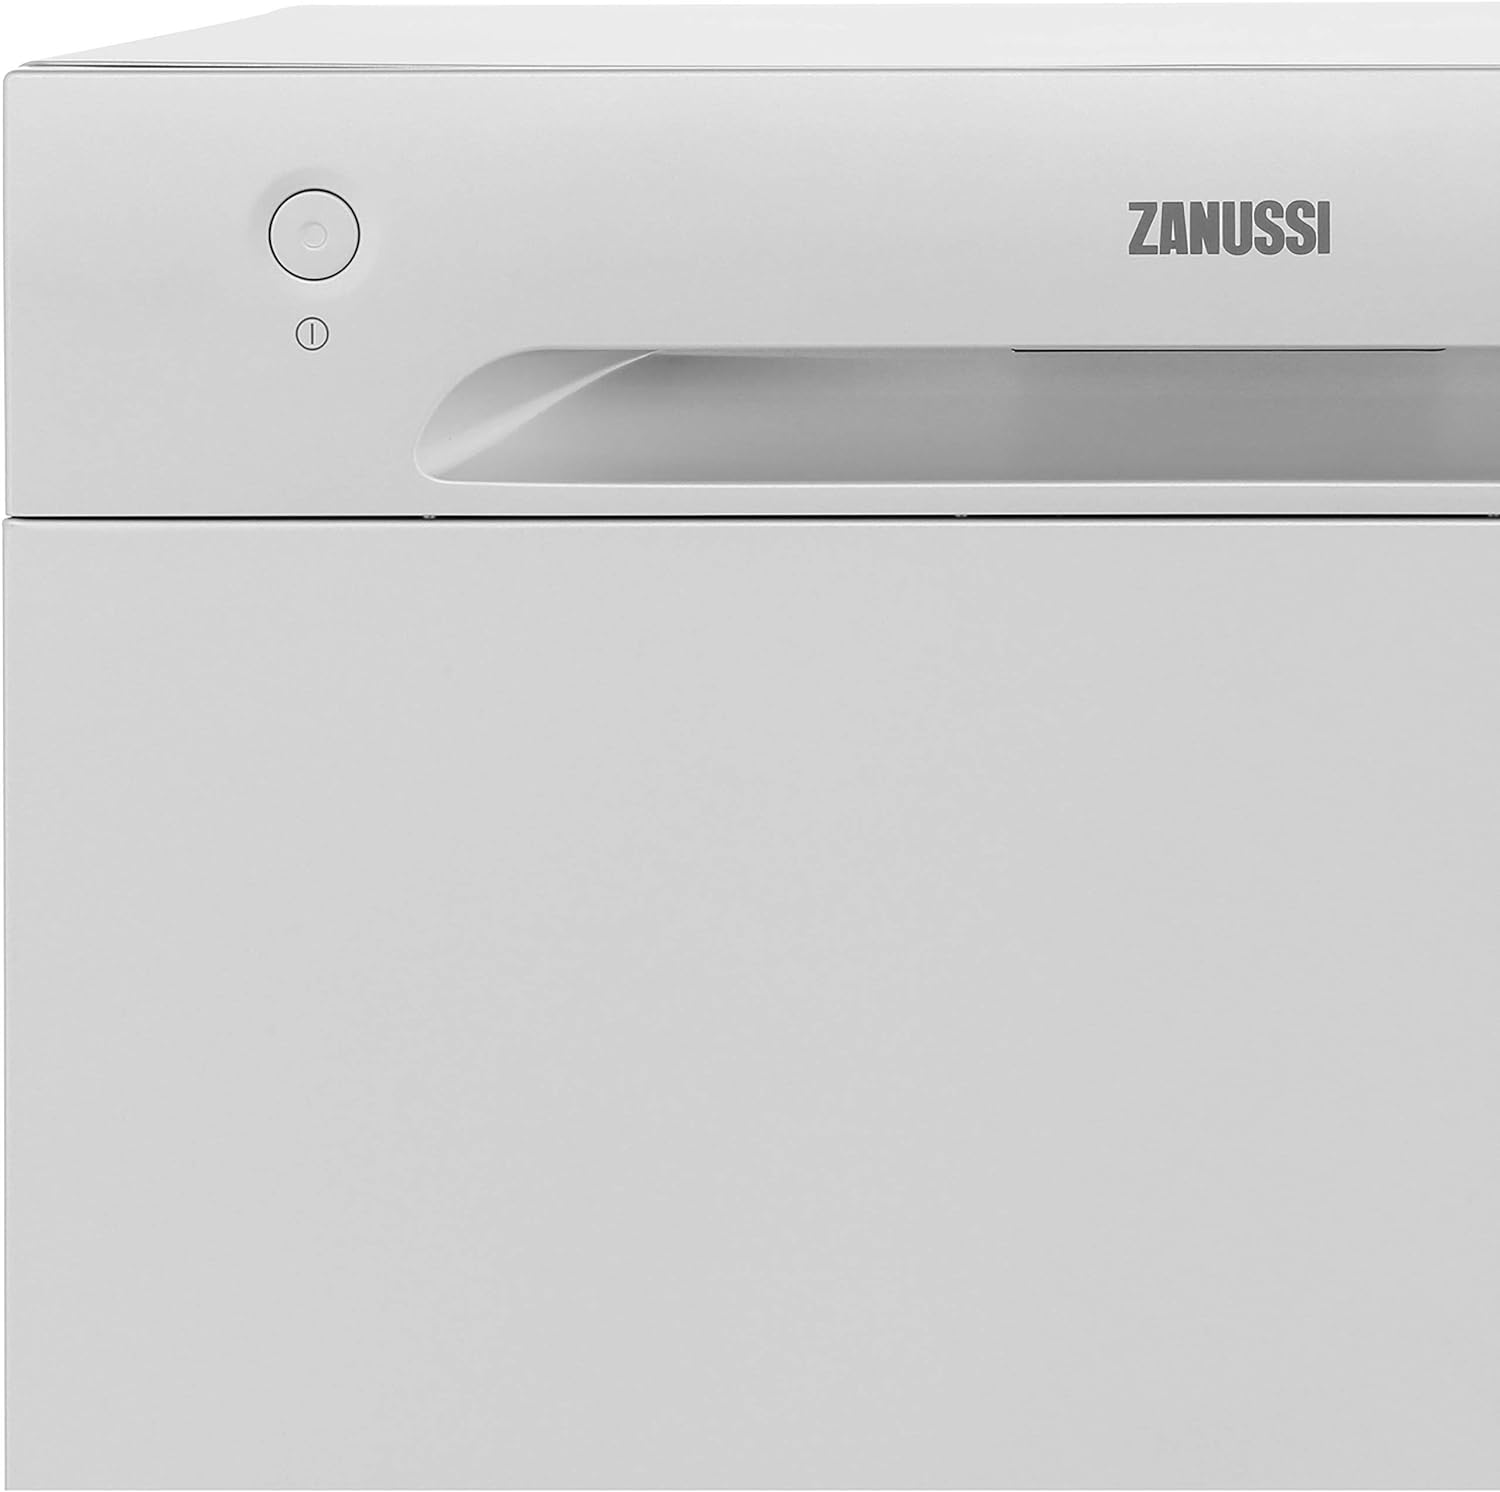 Zanussi ZDM17301SA Freestanding Counter Top Dishwasher, Compact Dishwasher, 55 cm Width, 6 Place Settings, 6 Programmes, Residual Drying, 52dB, Silver [Energy Class F] - Amazing Gadgets Outlet